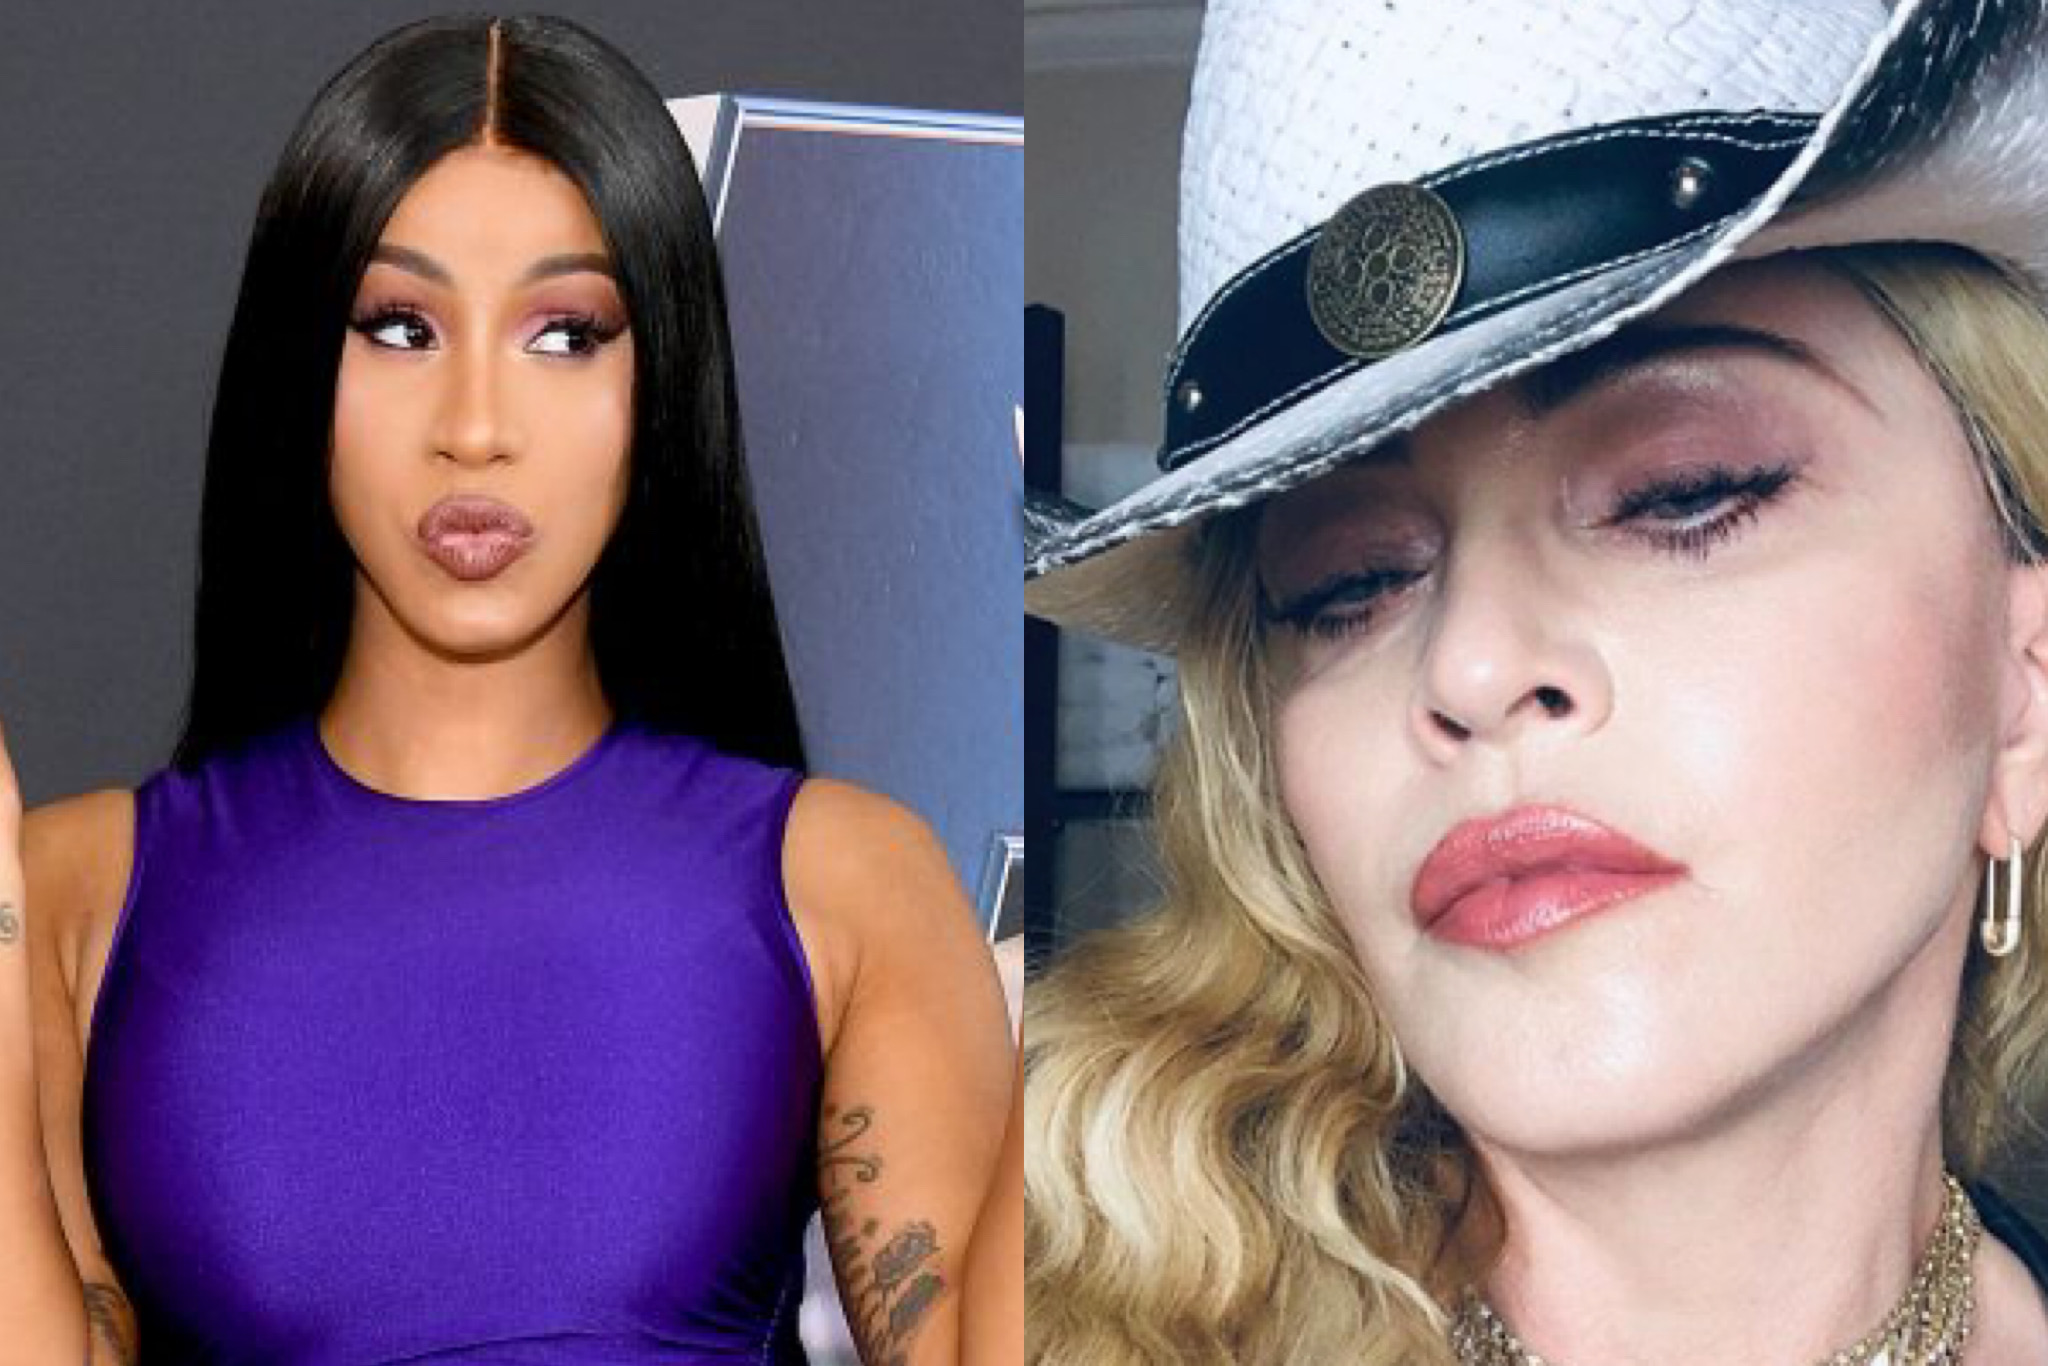 Cardi B Responds To Madonna “Getting Slick At The Mouth” In Her Recent Statement About Paving The Way For Female Artists image pic